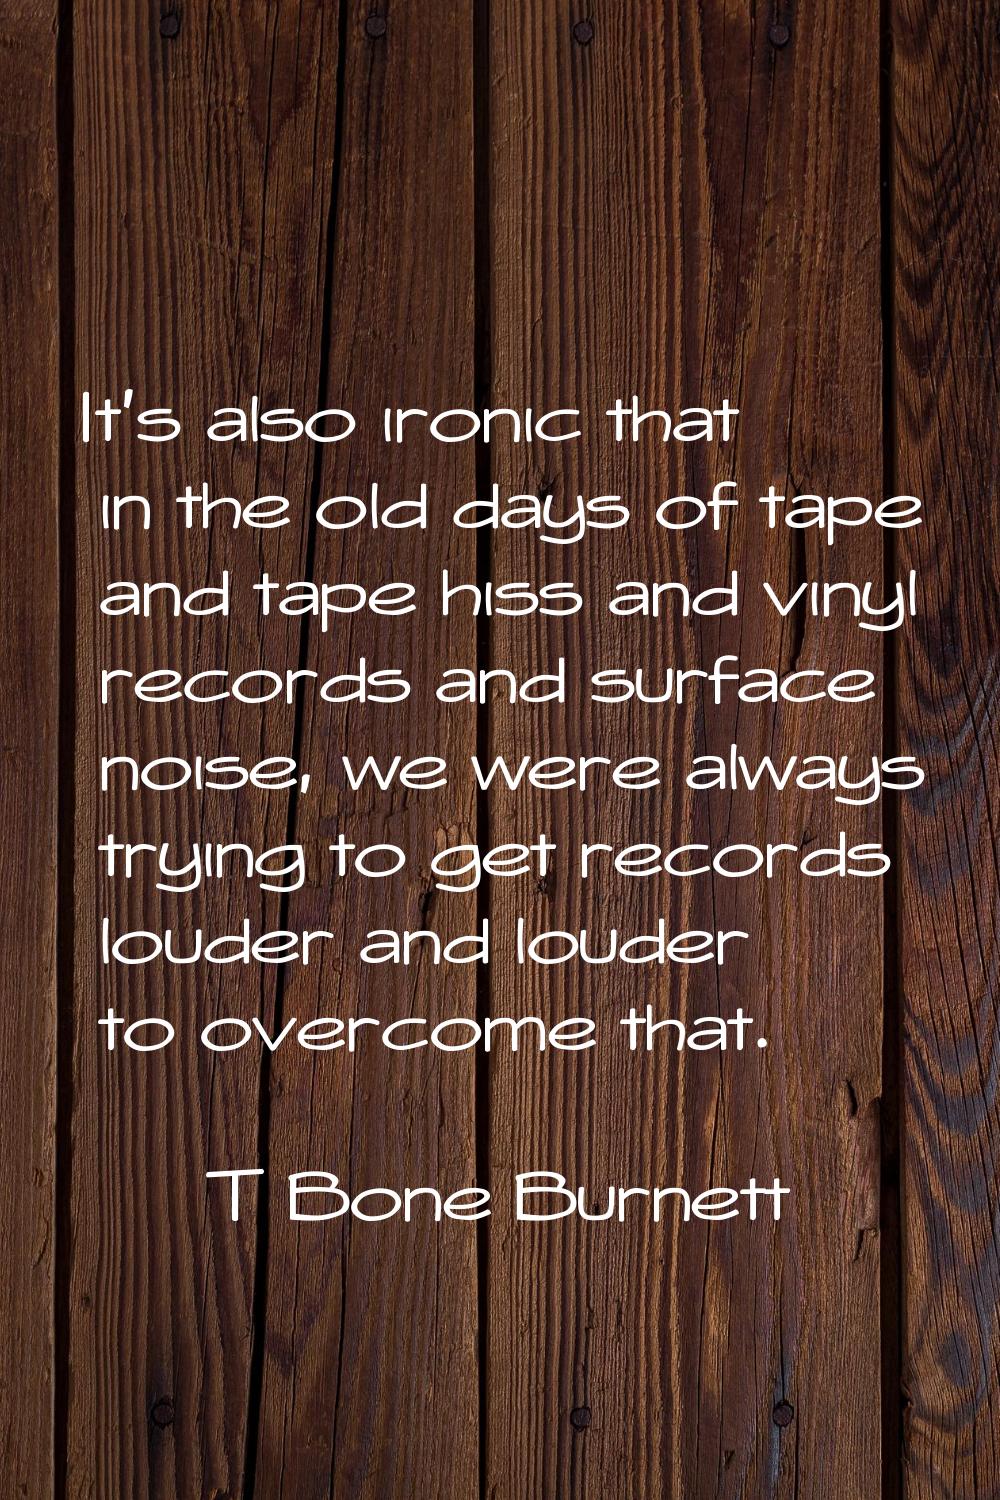 It's also ironic that in the old days of tape and tape hiss and vinyl records and surface noise, we